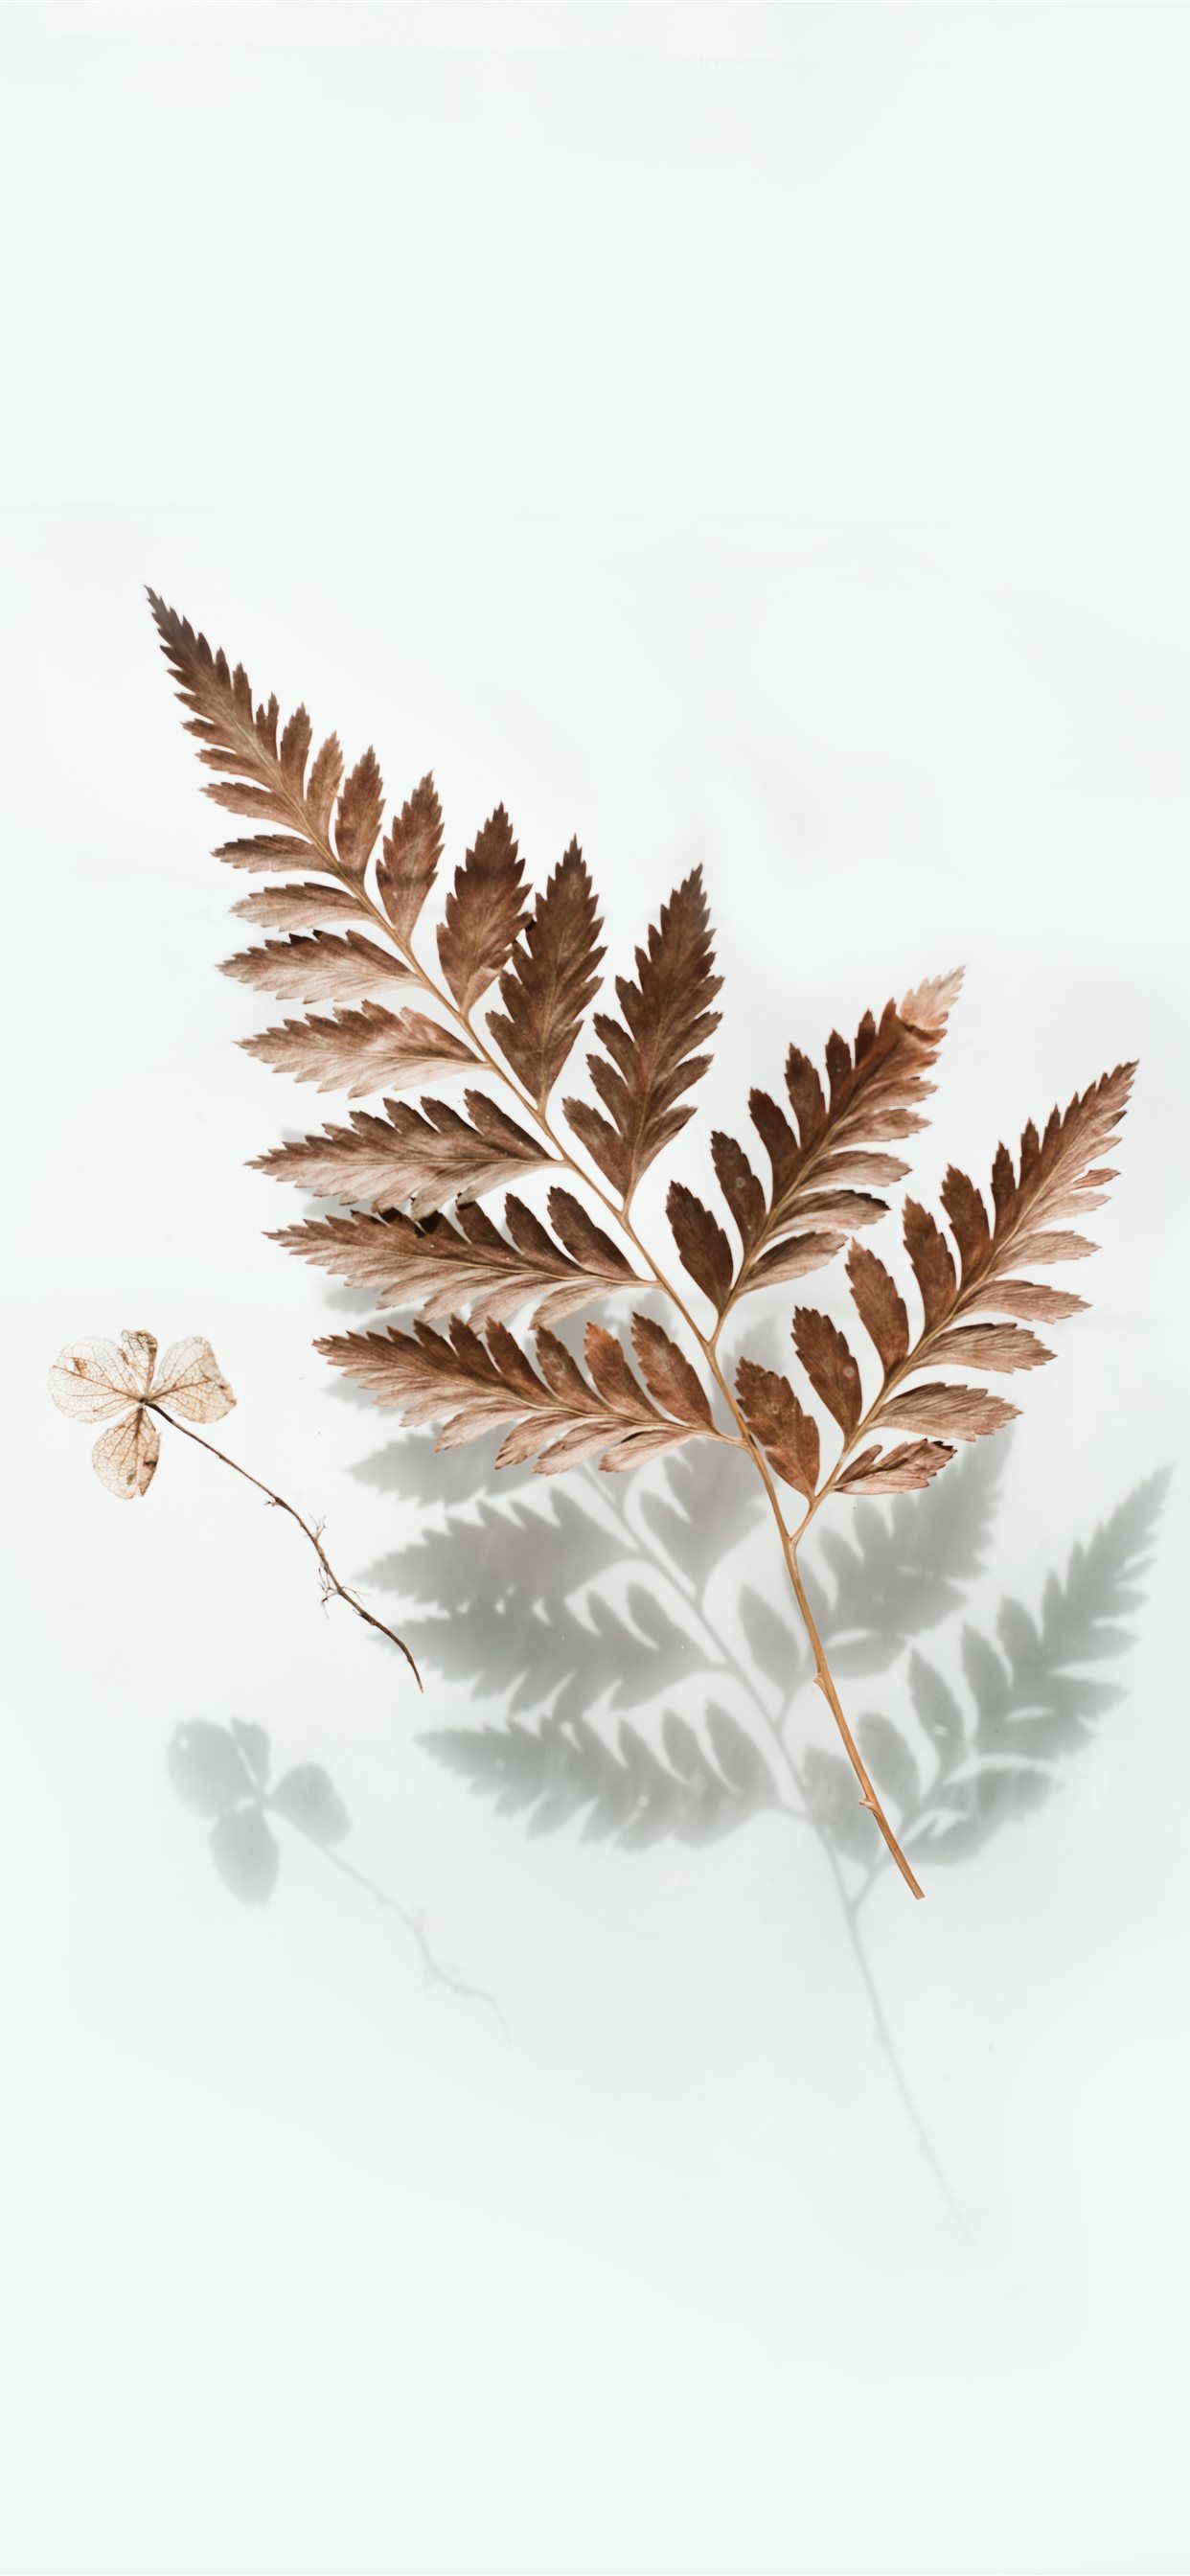 A dry fern leaf and a small dried flower on a white background - Leaves